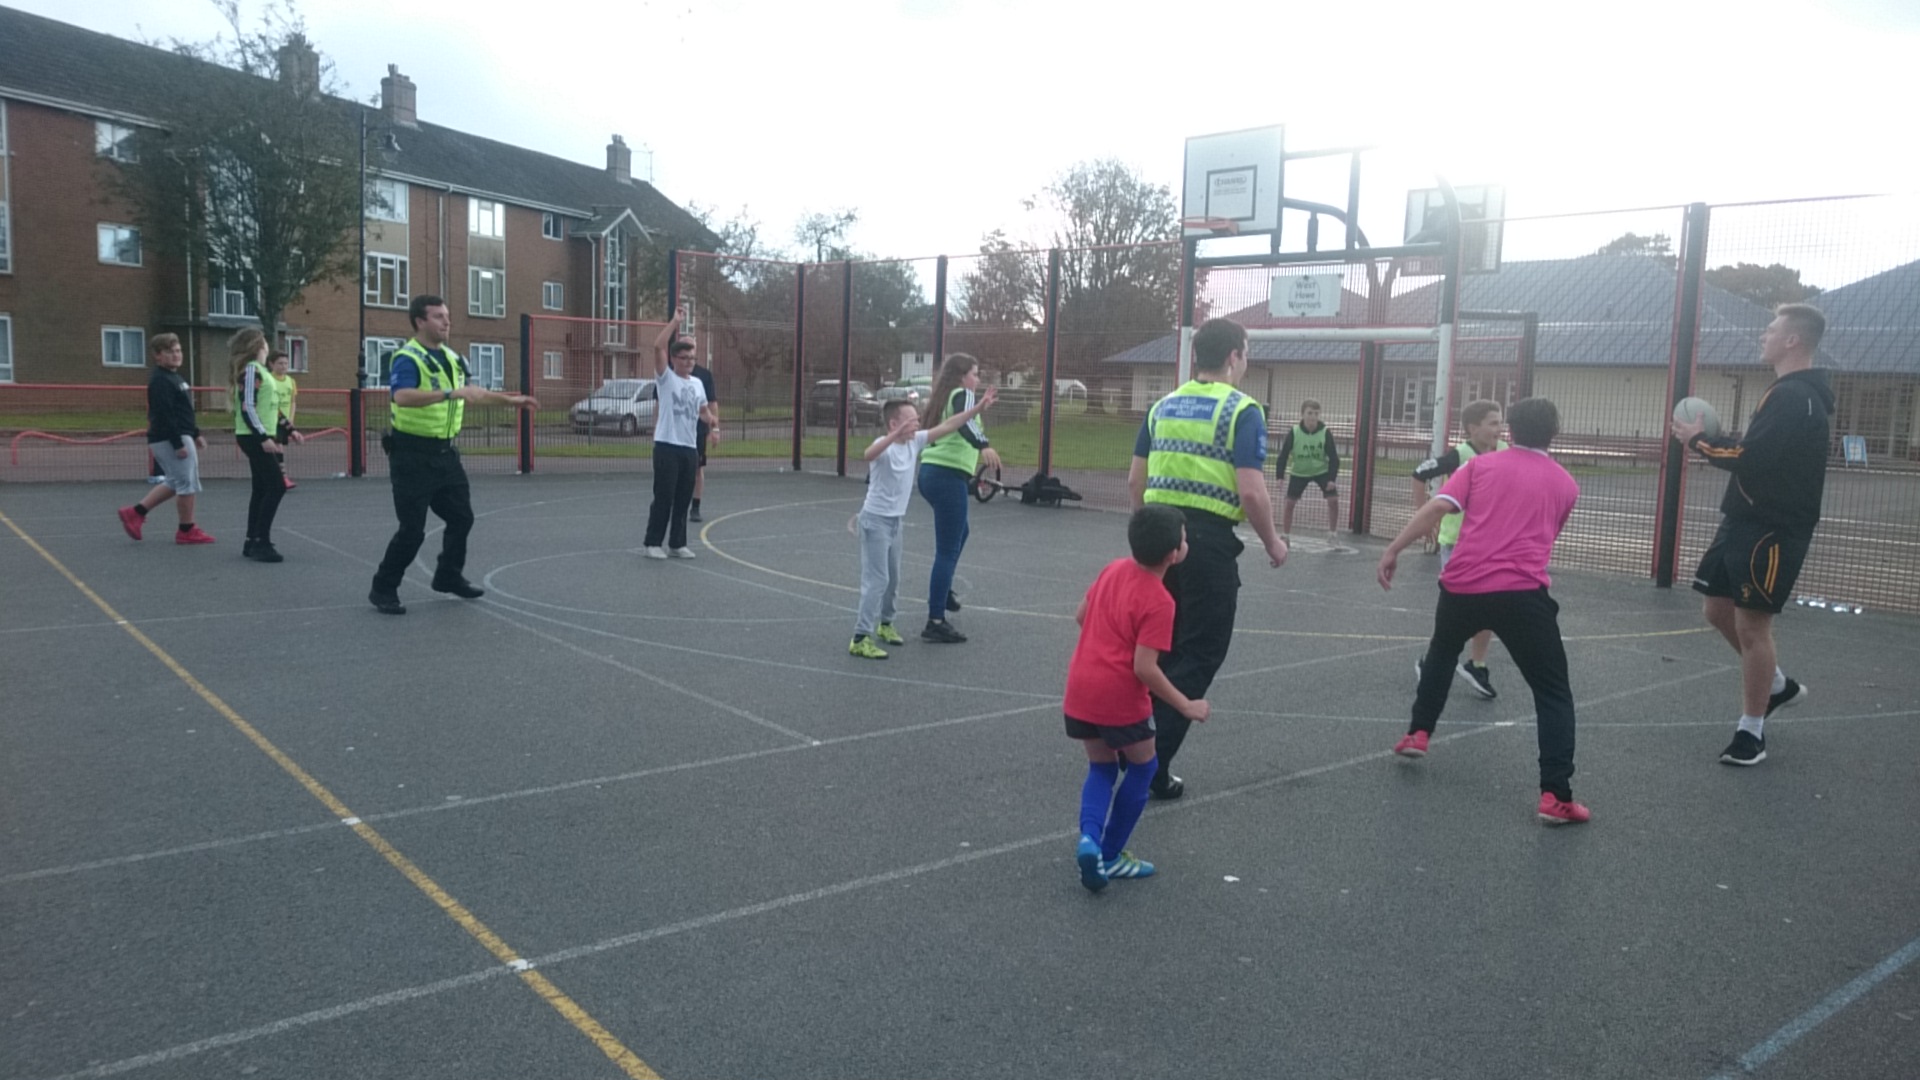 local police officers joining in games with children